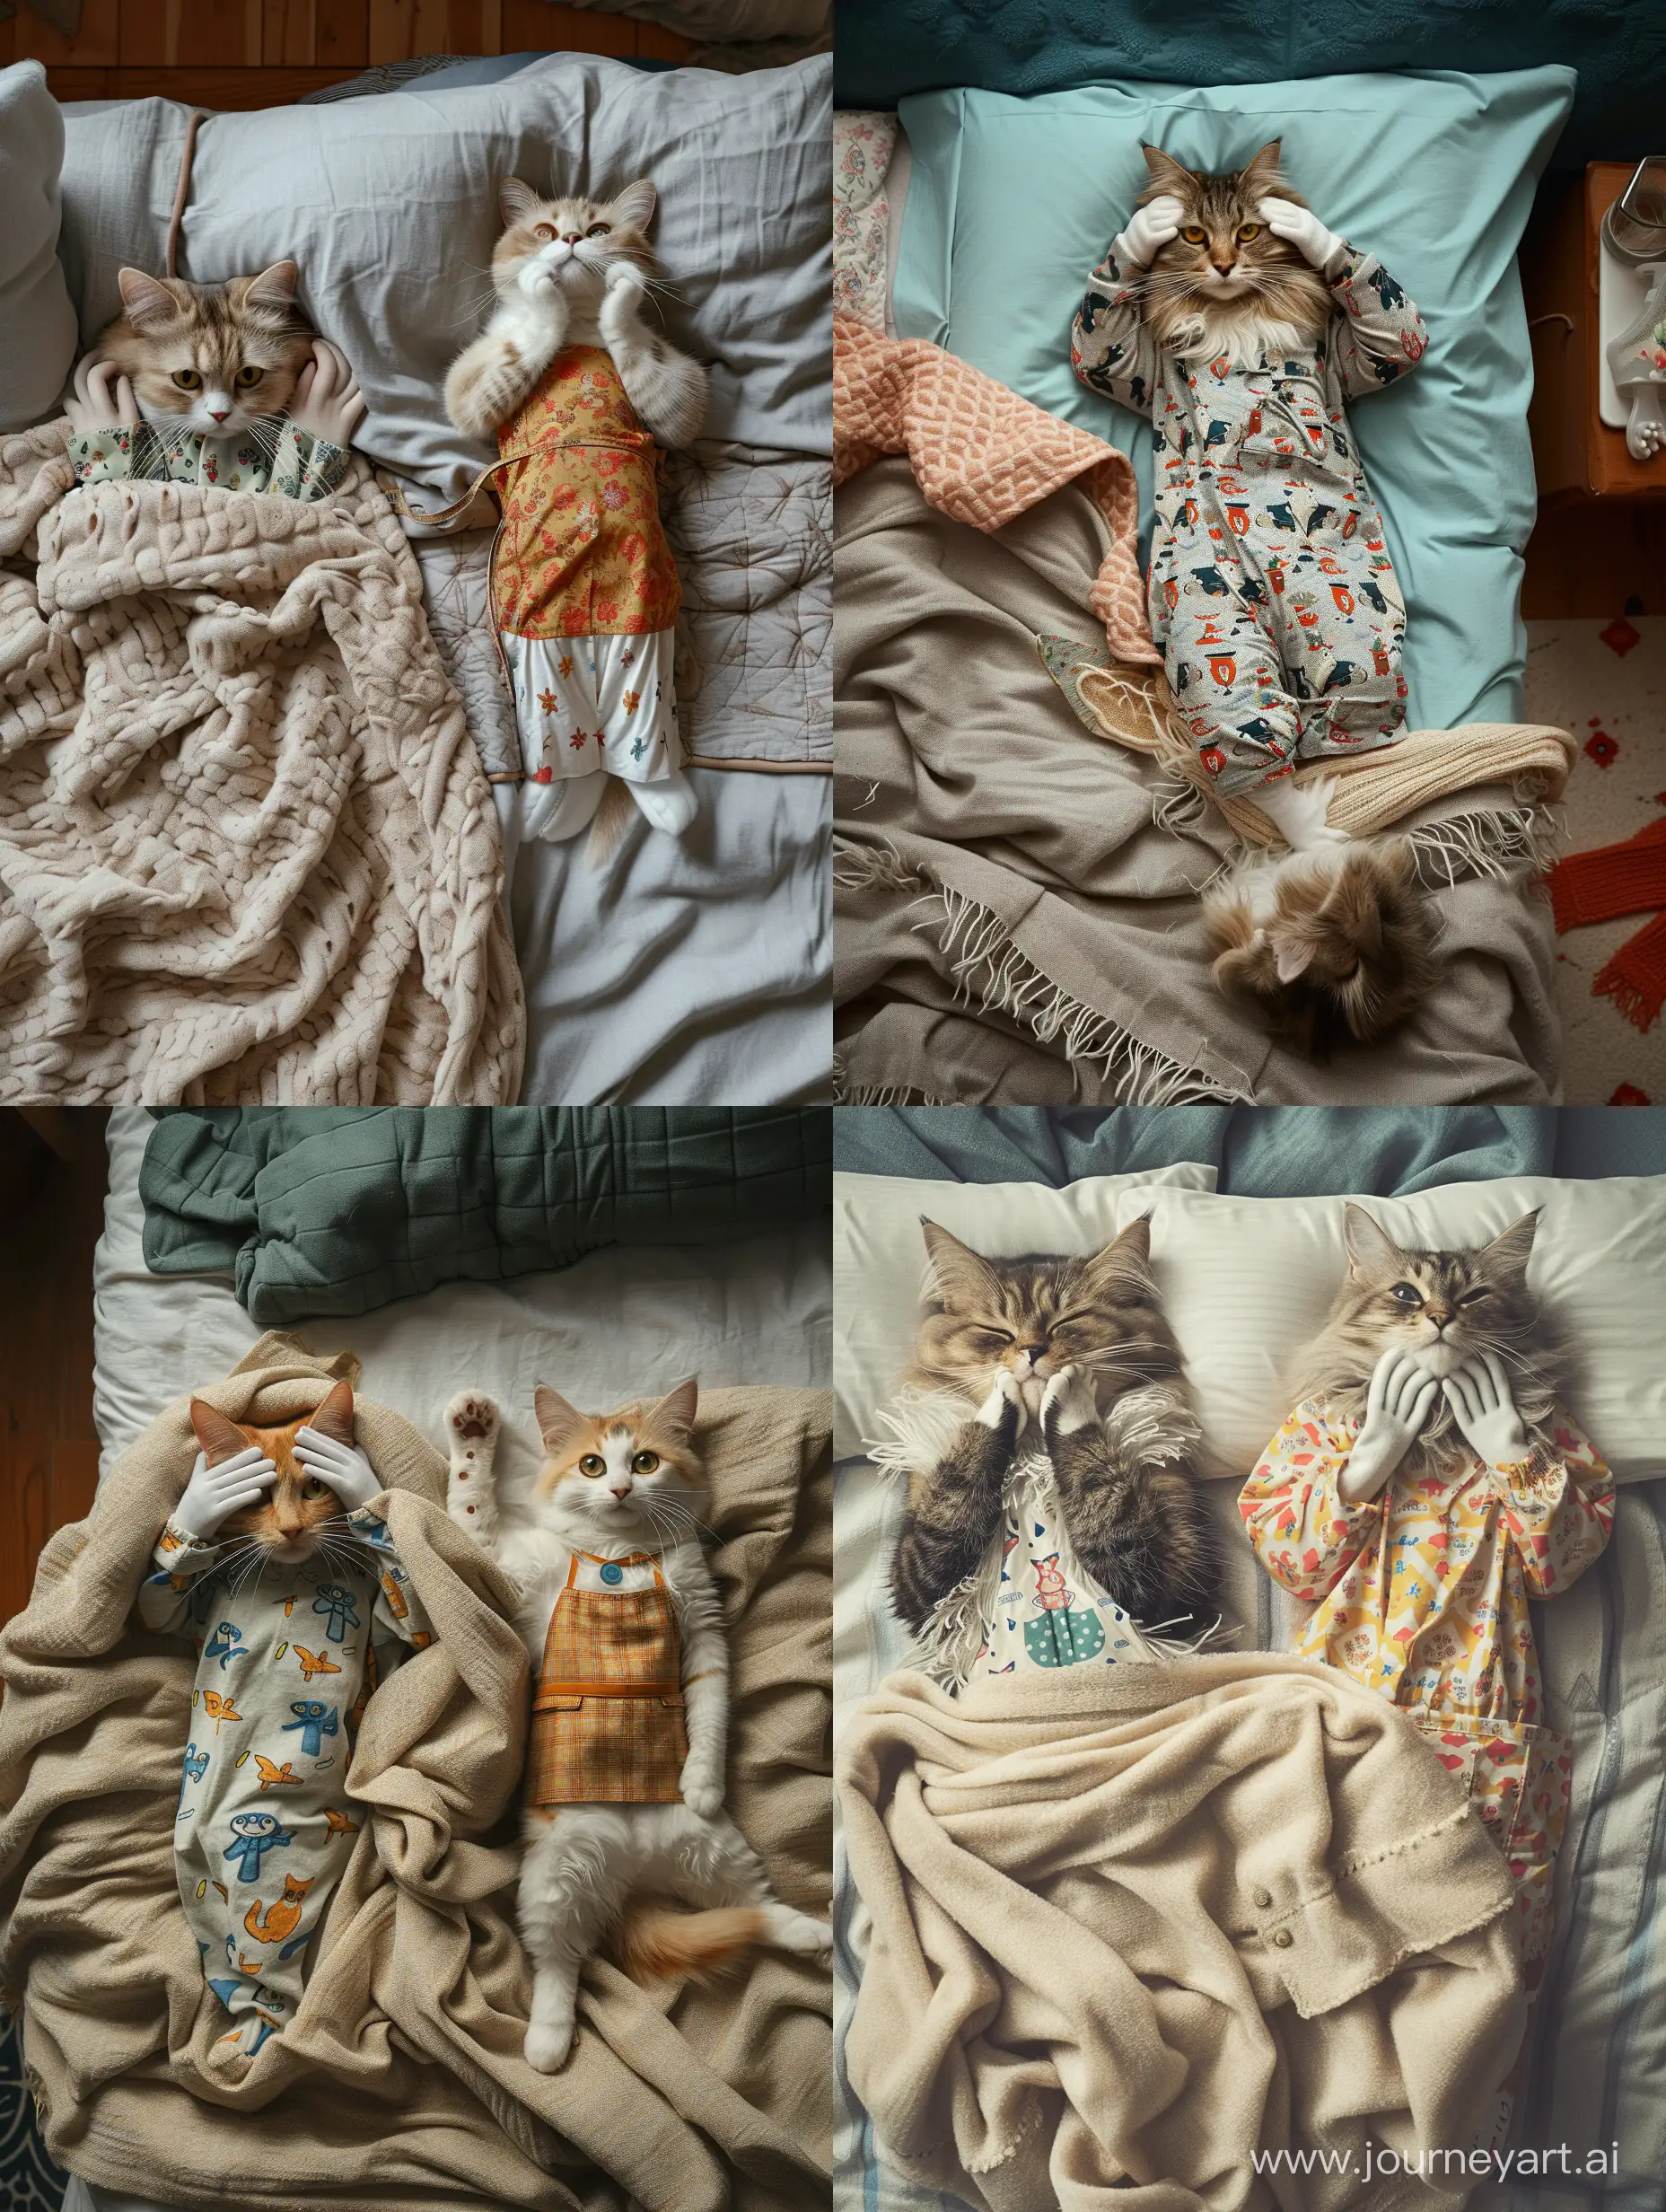 Adorable-Cats-in-Pajamas-and-Aprons-Domestic-Harmony-Scene